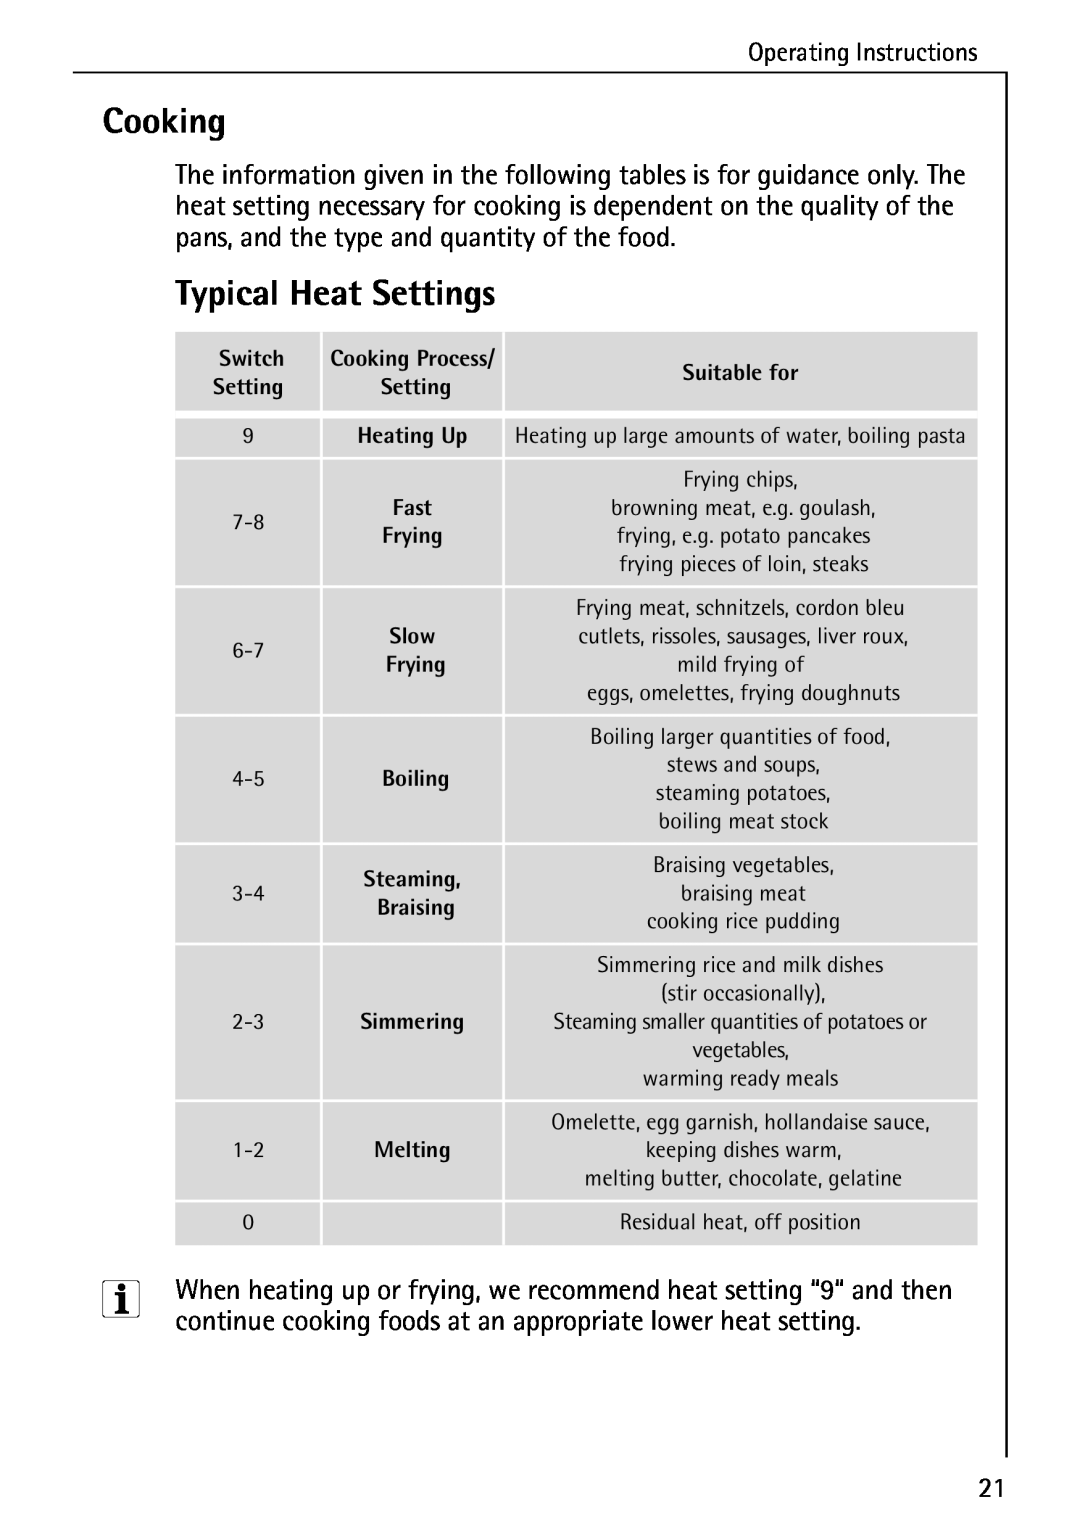 AEG 5033 V Cooking, Typical Heat Settings, continue cooking foods at an appropriate lower heat setting 